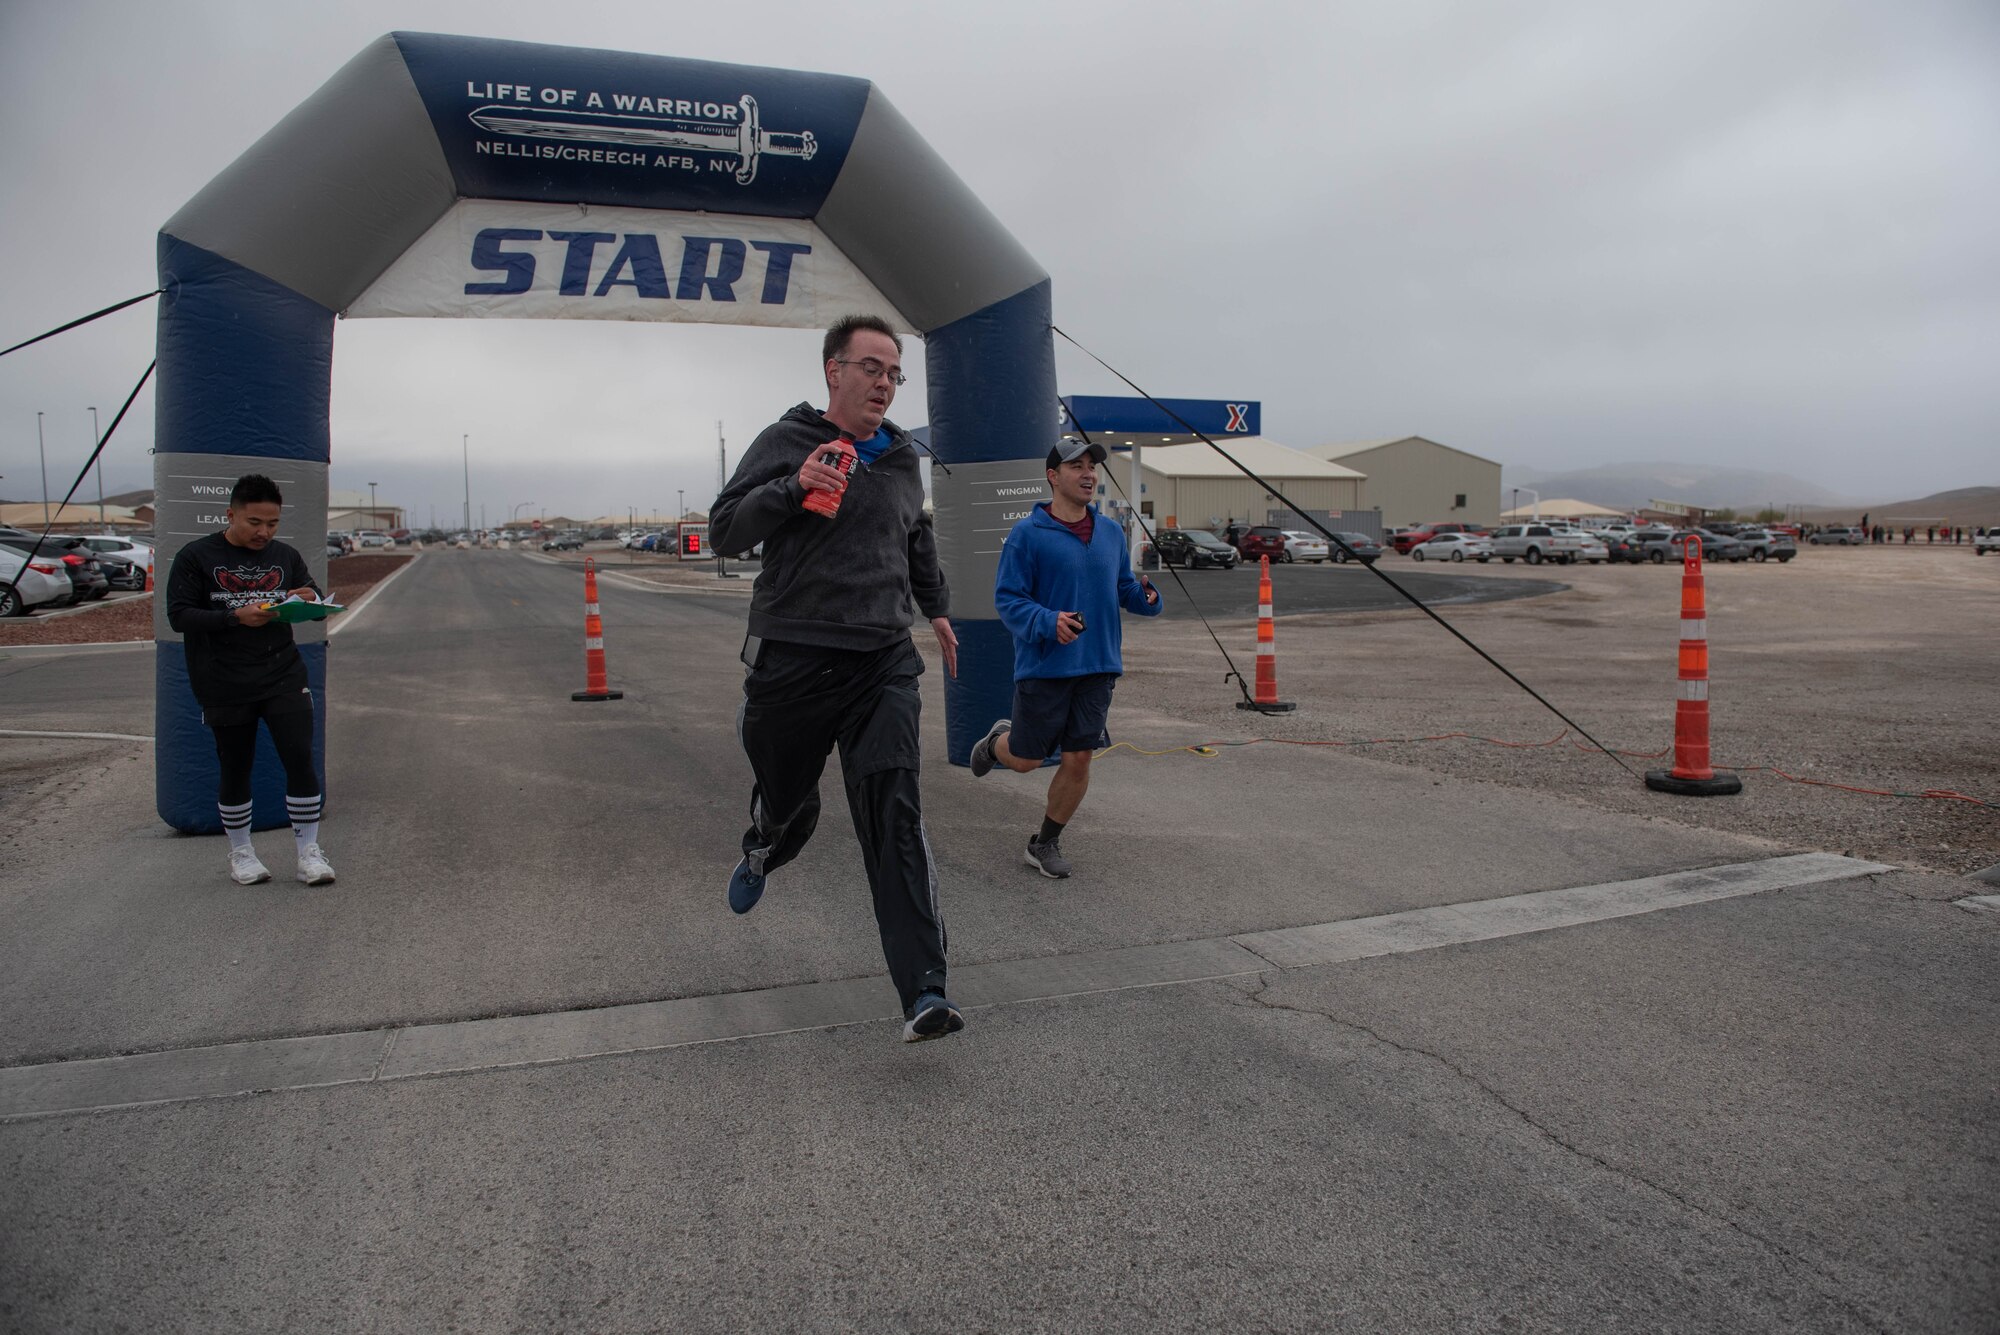 Two Airmen run past a finish line after finishing a 5K.